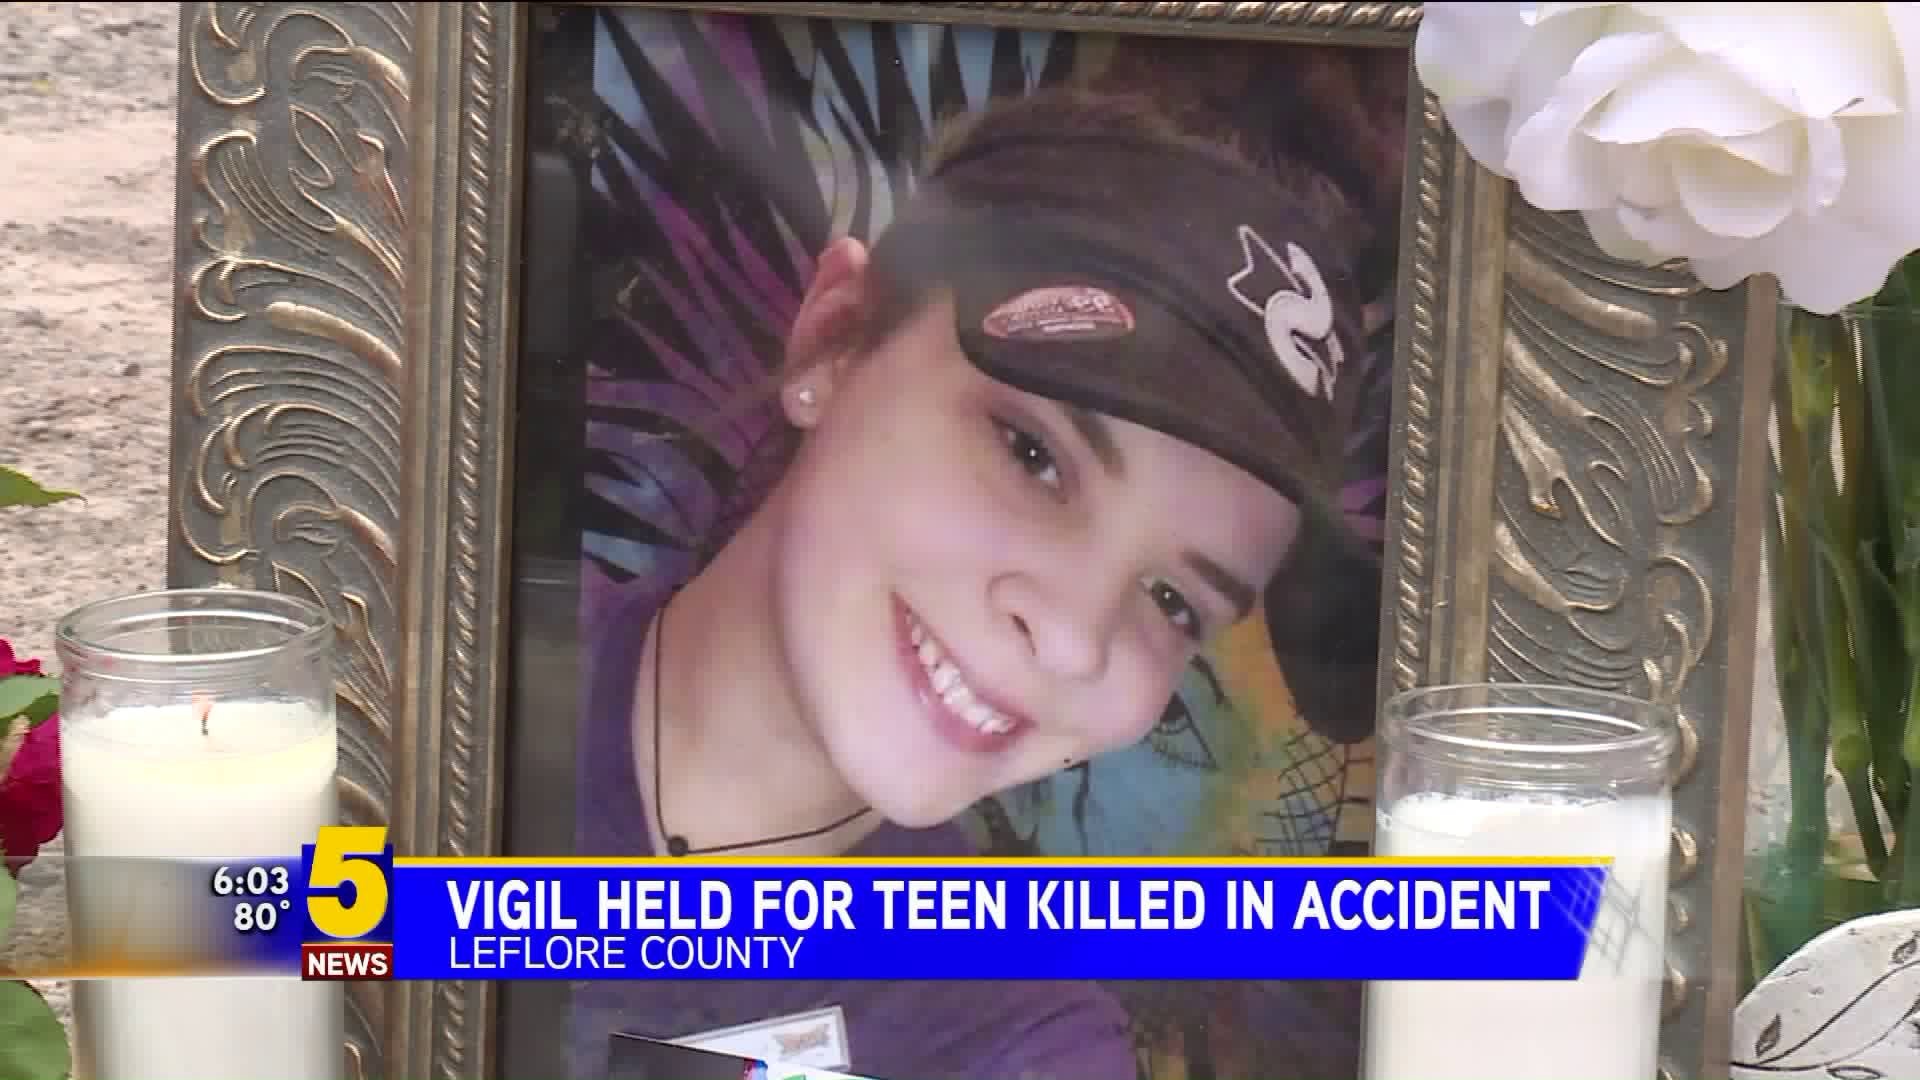 Vigil Held For Teen Killed in Accident